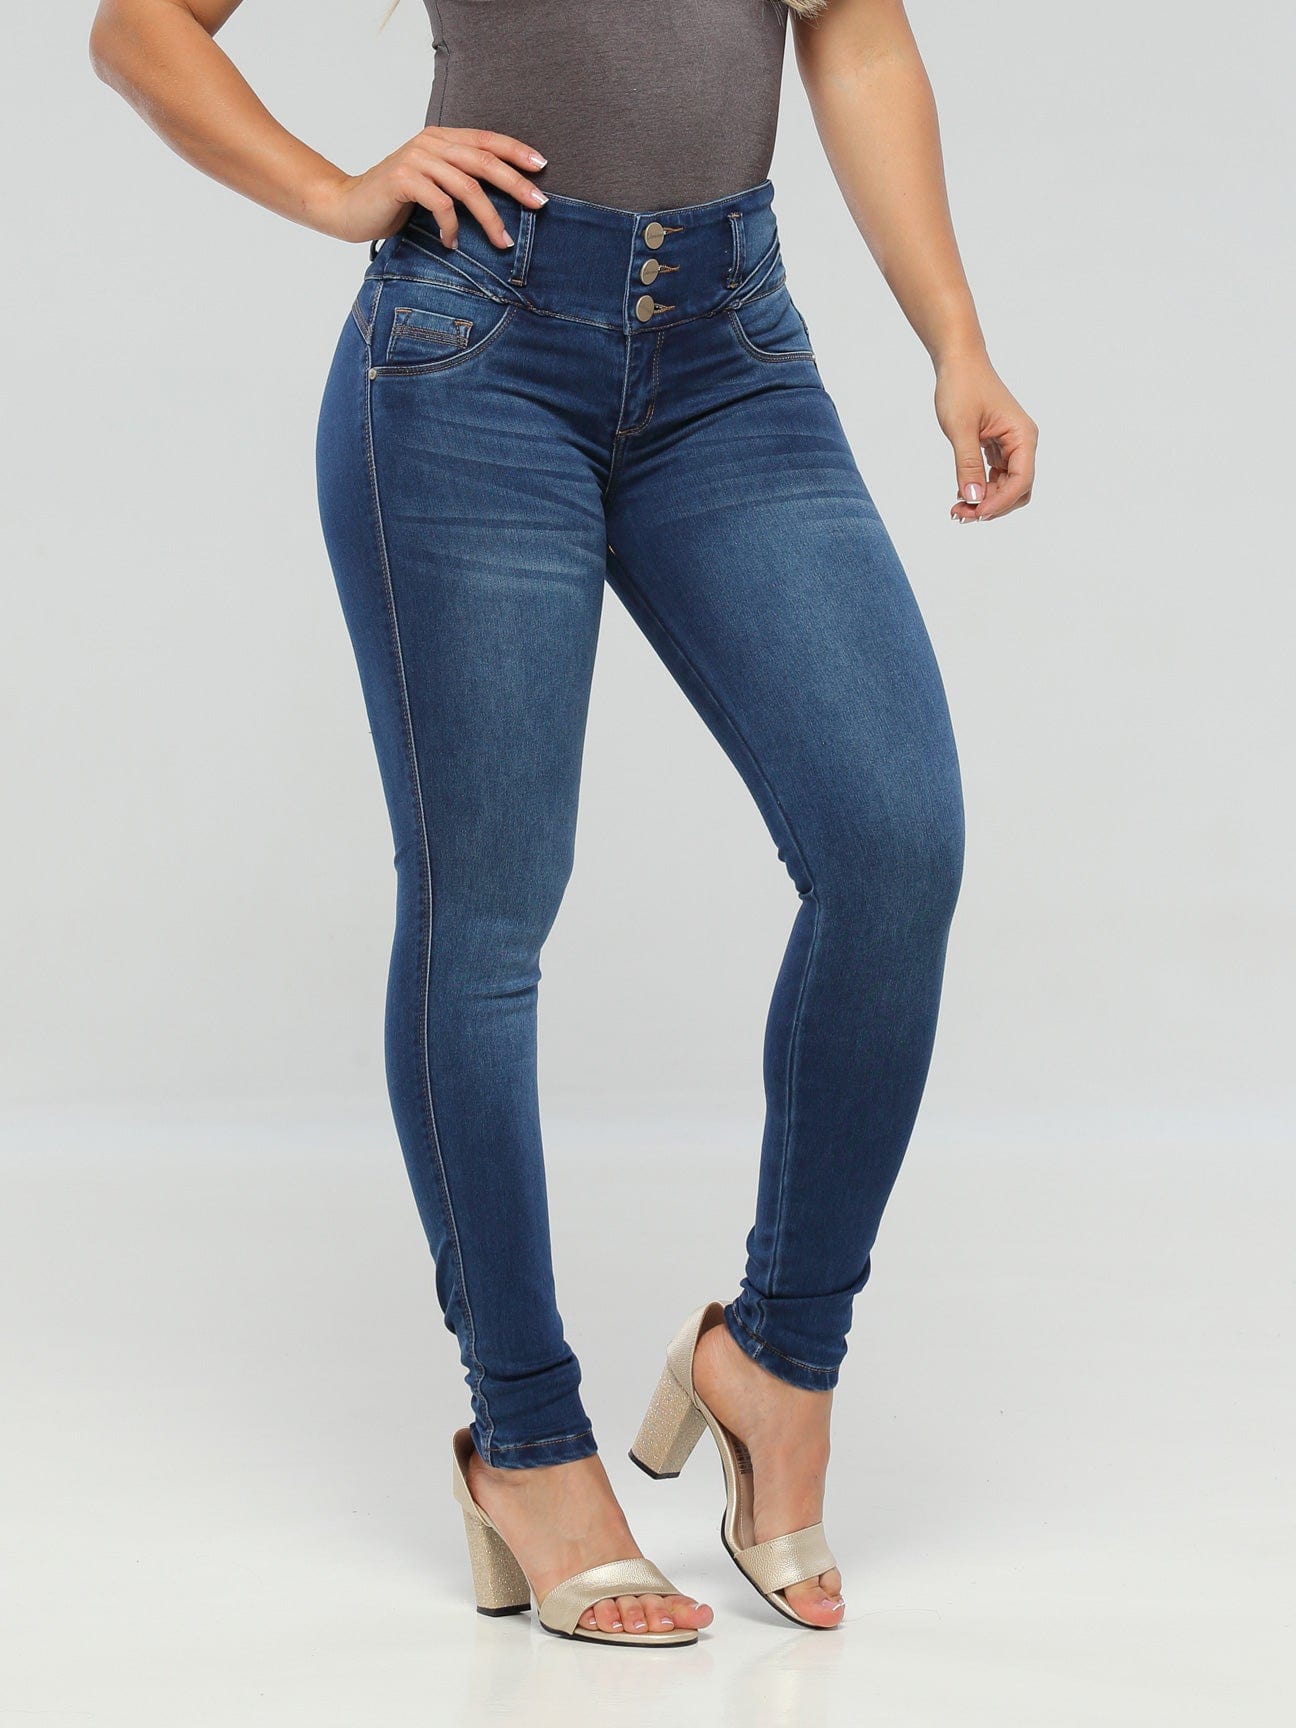 JEANS COLOMBIANOS SC9683 Authentic Colombian Push Up Jeans, Jean Levanta  Cola